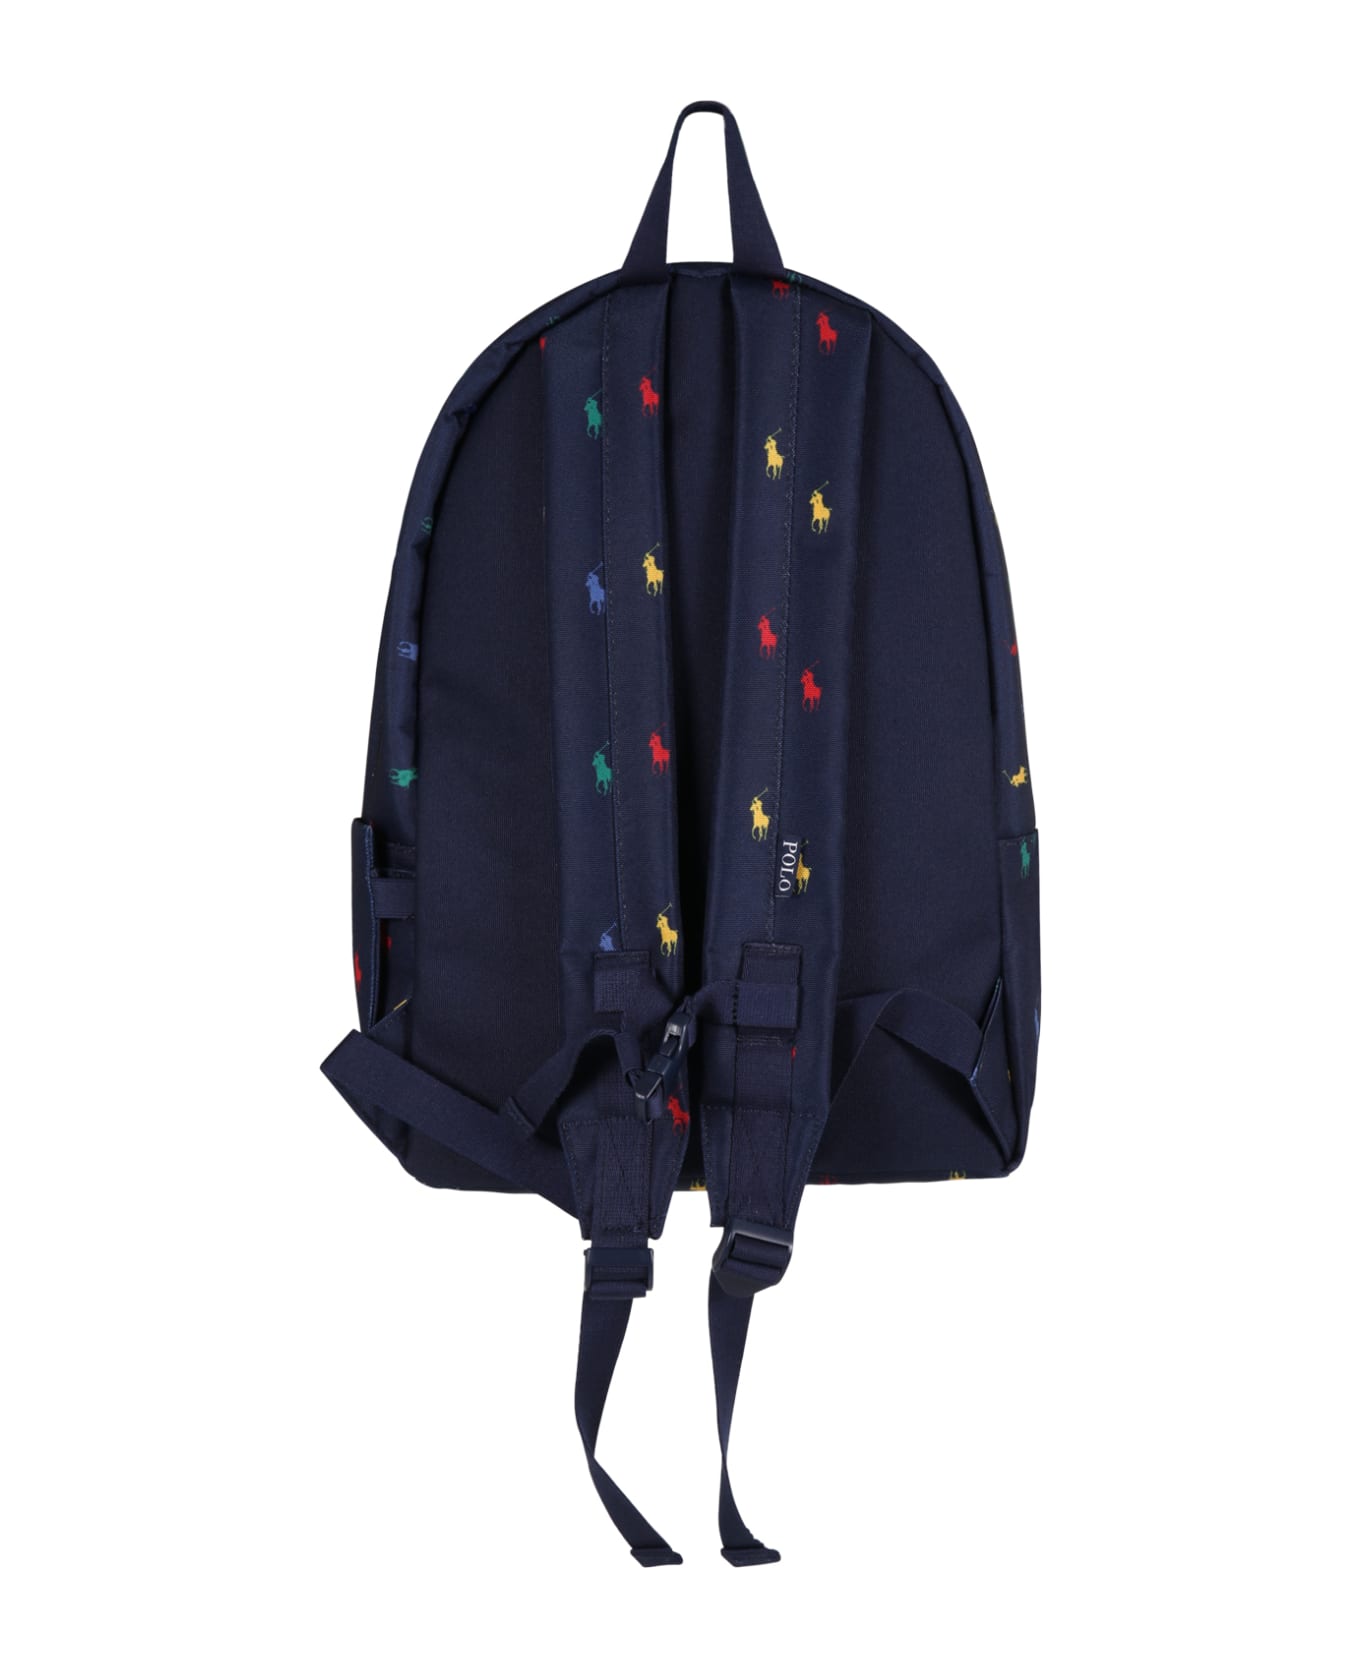 Ralph Lauren Blue Backpack For Kids With Pony Logos - Blue アクセサリー＆ギフト